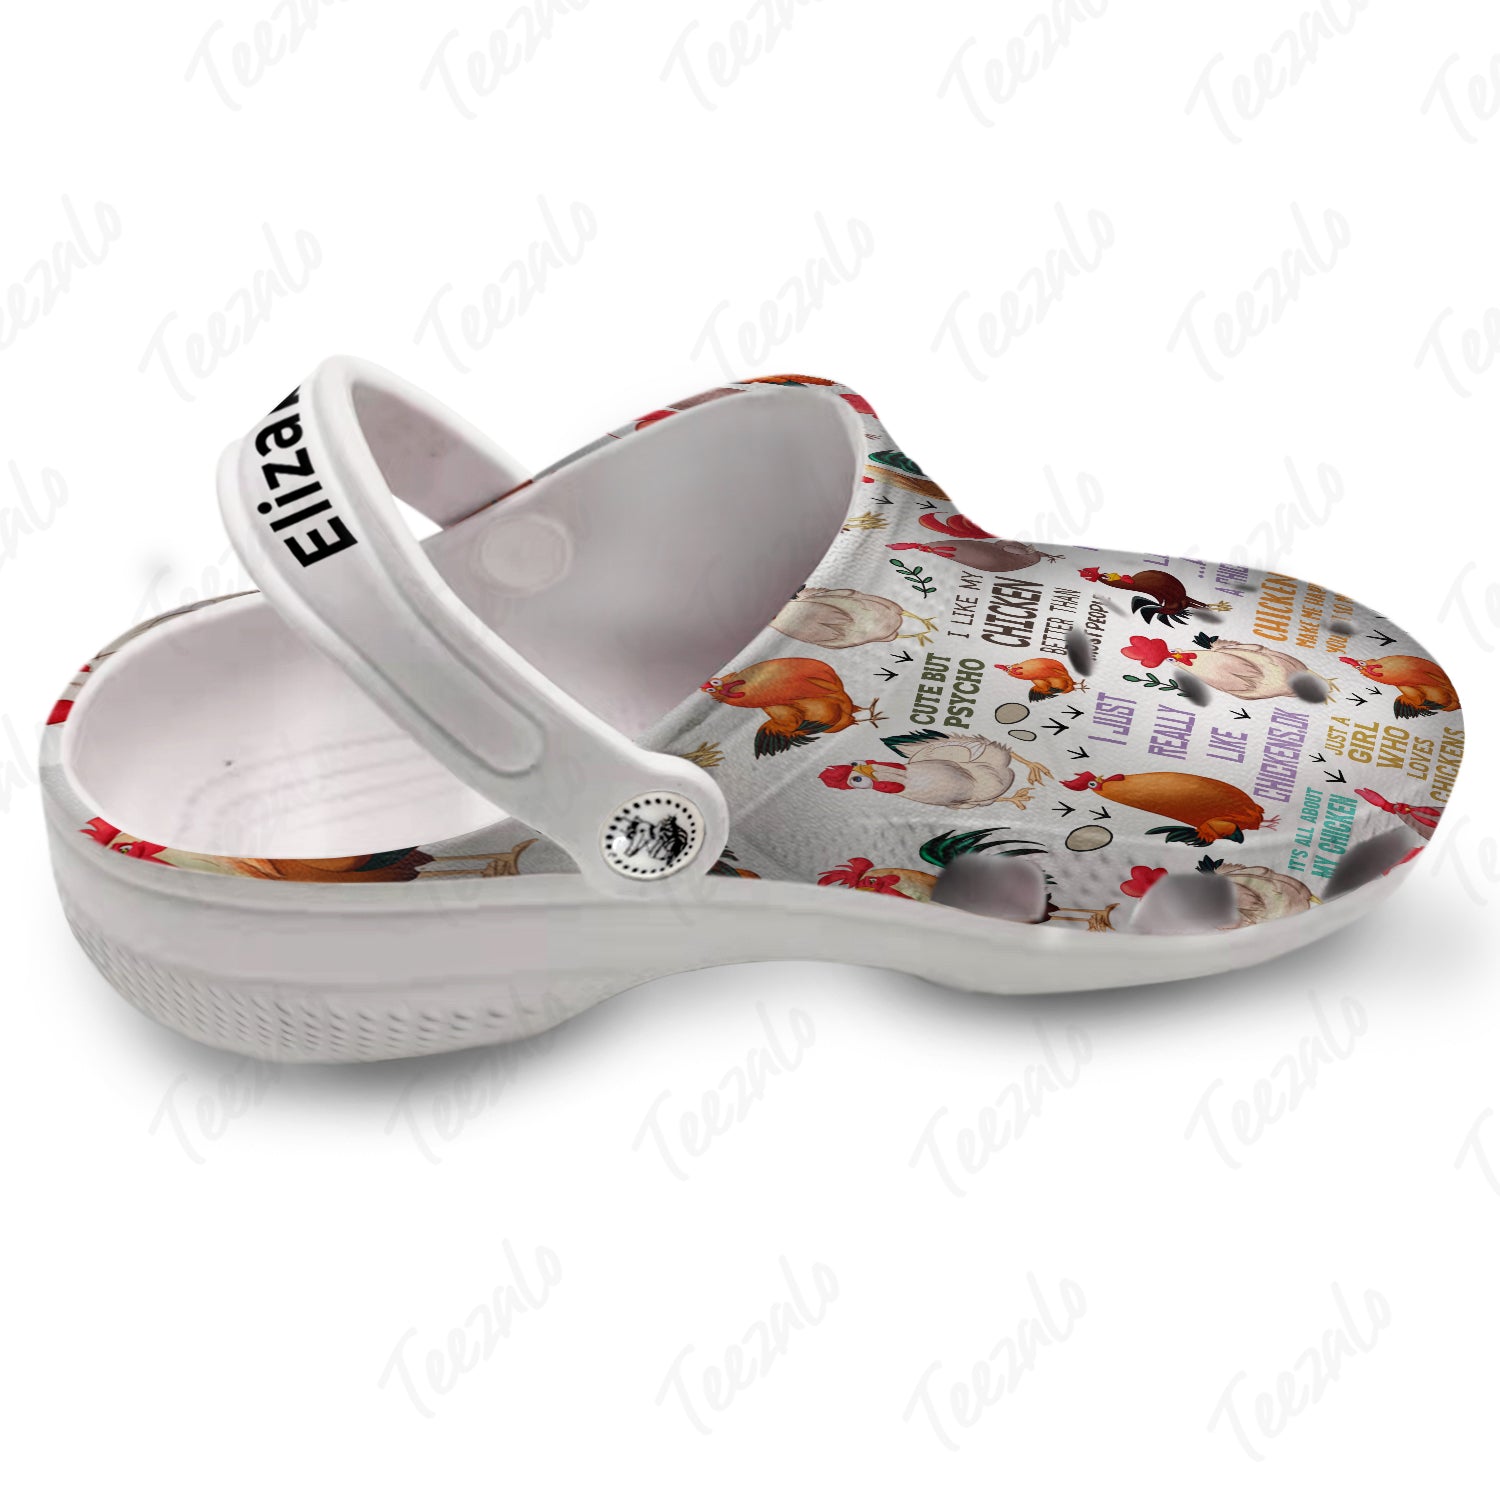 Chicken Personalized Clogs Shoes With Cute And Quotes